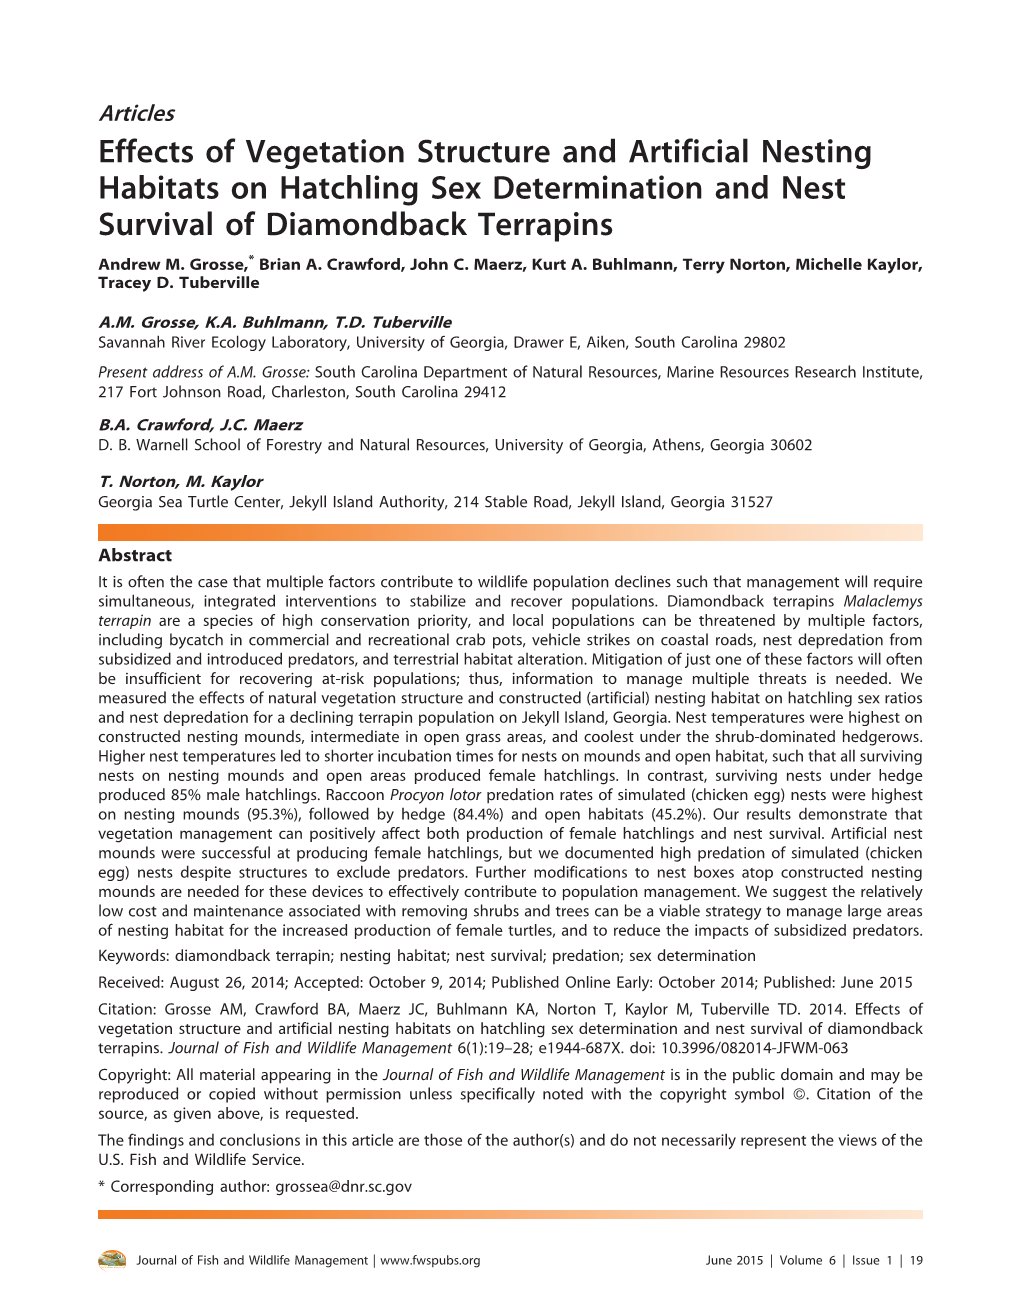 Effects of Vegetation Structure and Artificial Nesting Habitats on Hatchling Sex Determination and Nest Survival of Diamondback Terrapins Andrew M